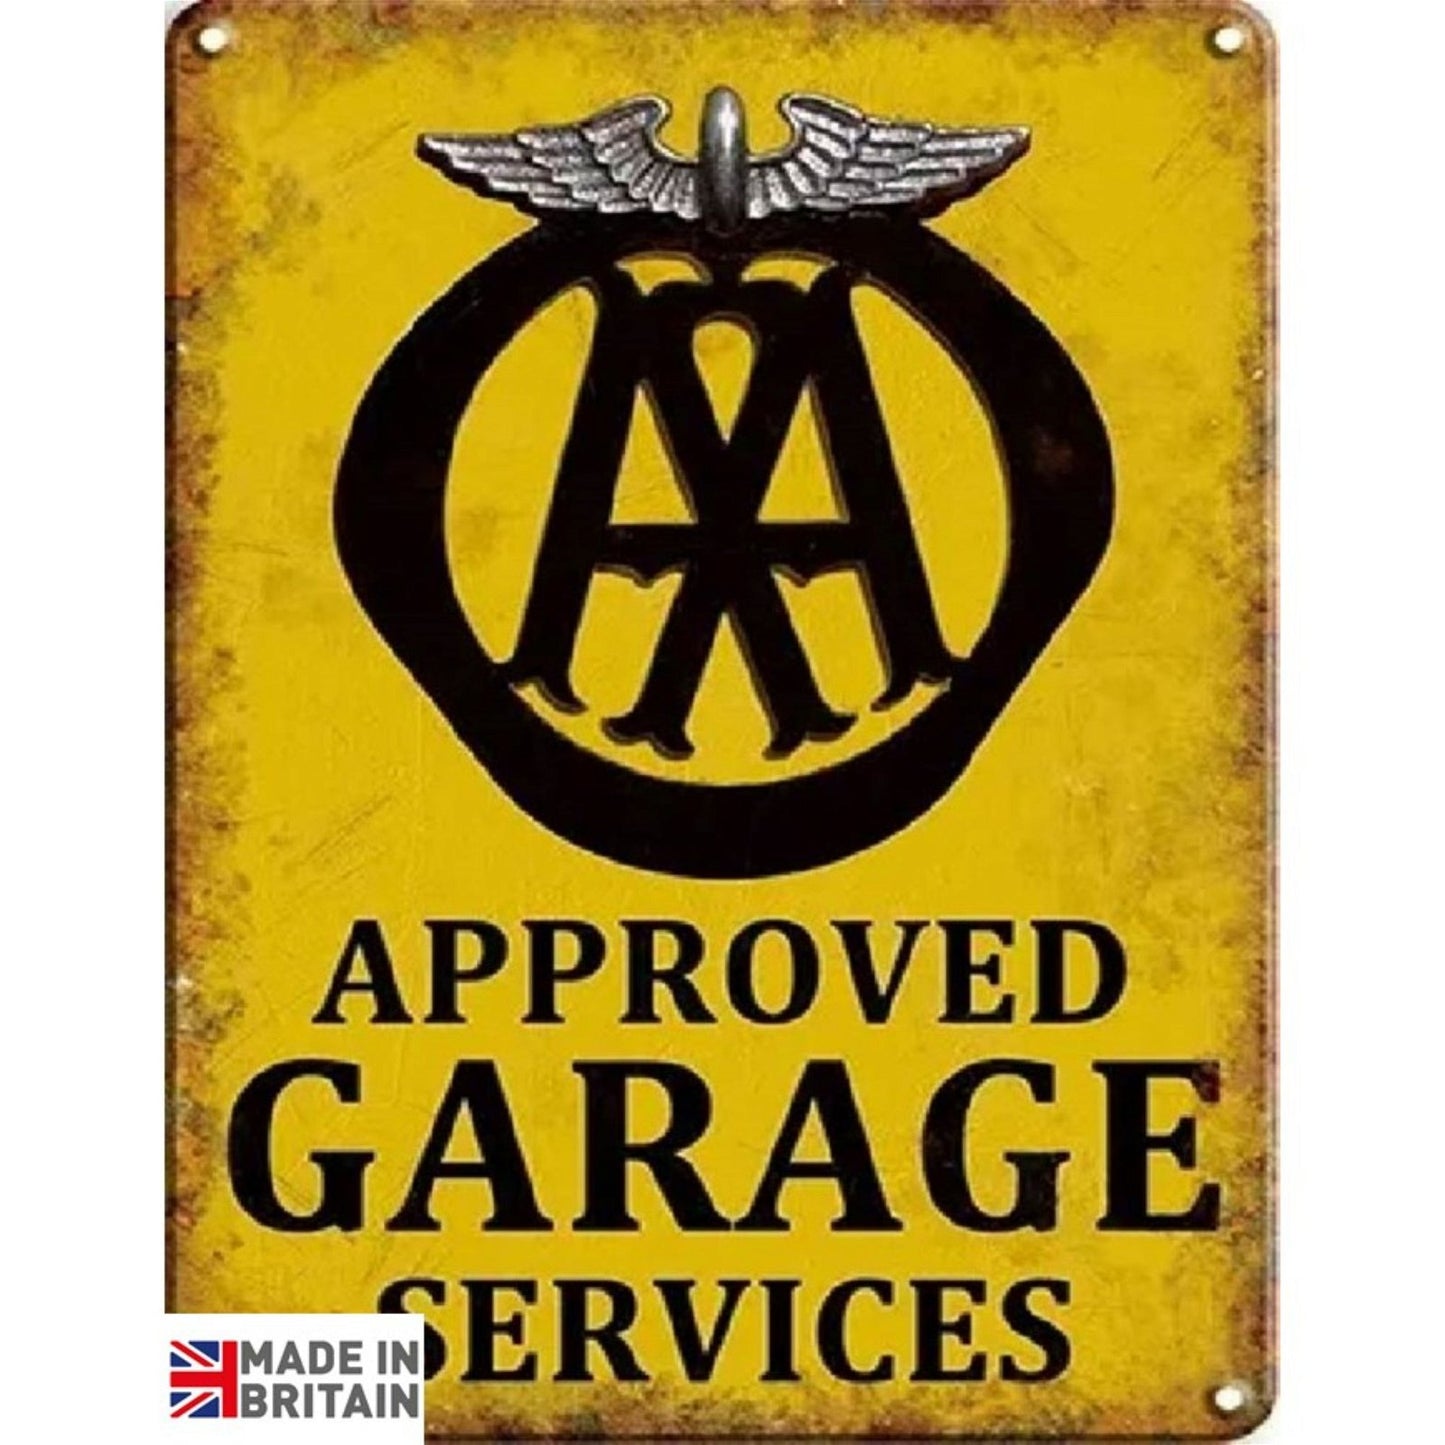 Small Metal Sign 45 x 37.5cm Approved Garage Services